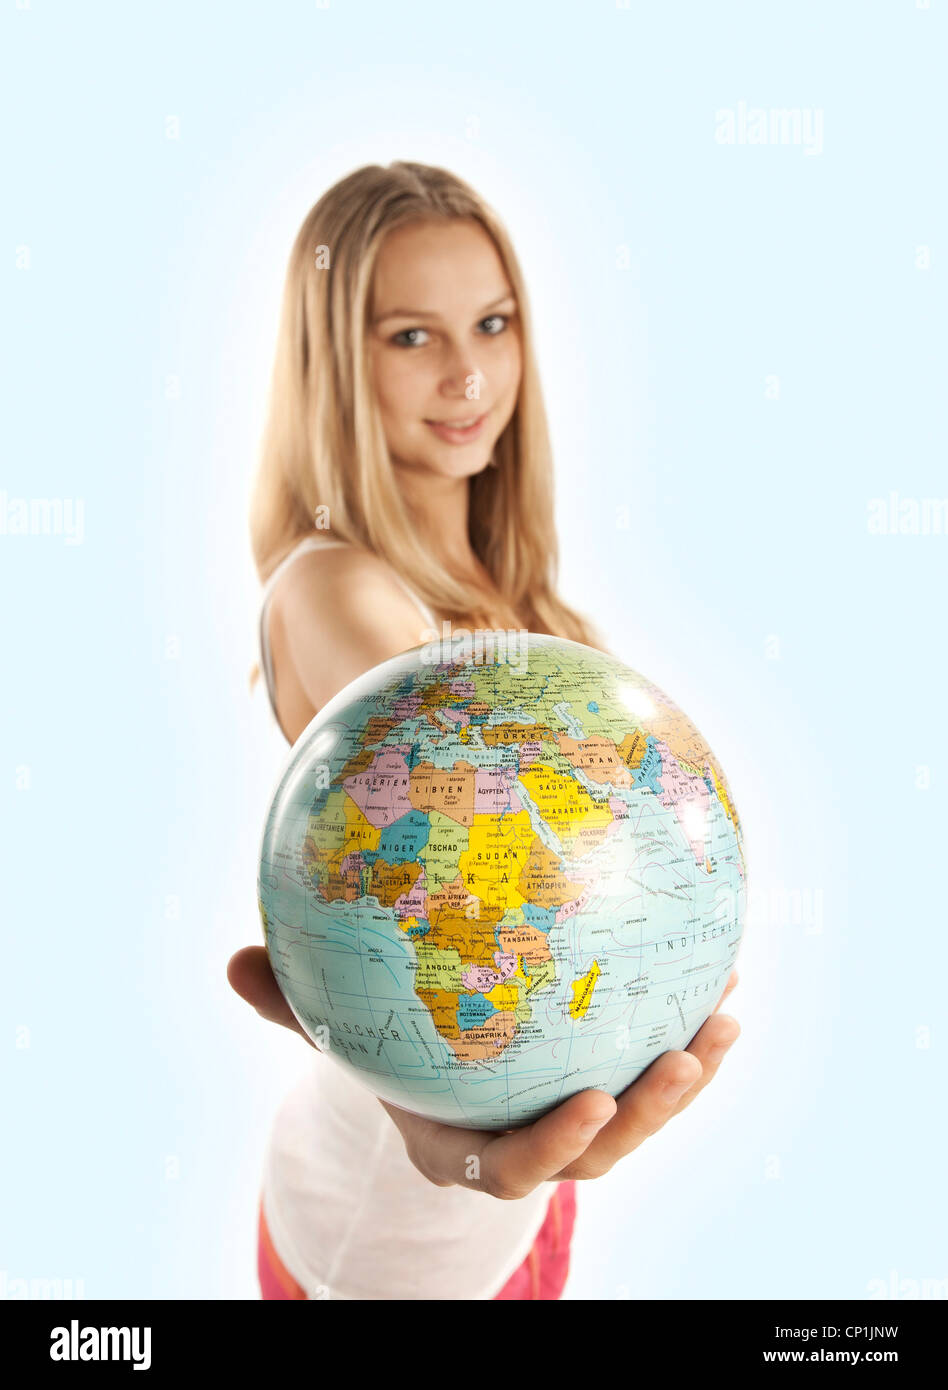 Young beautiful woman holding a globe in her hand. Stock Photo